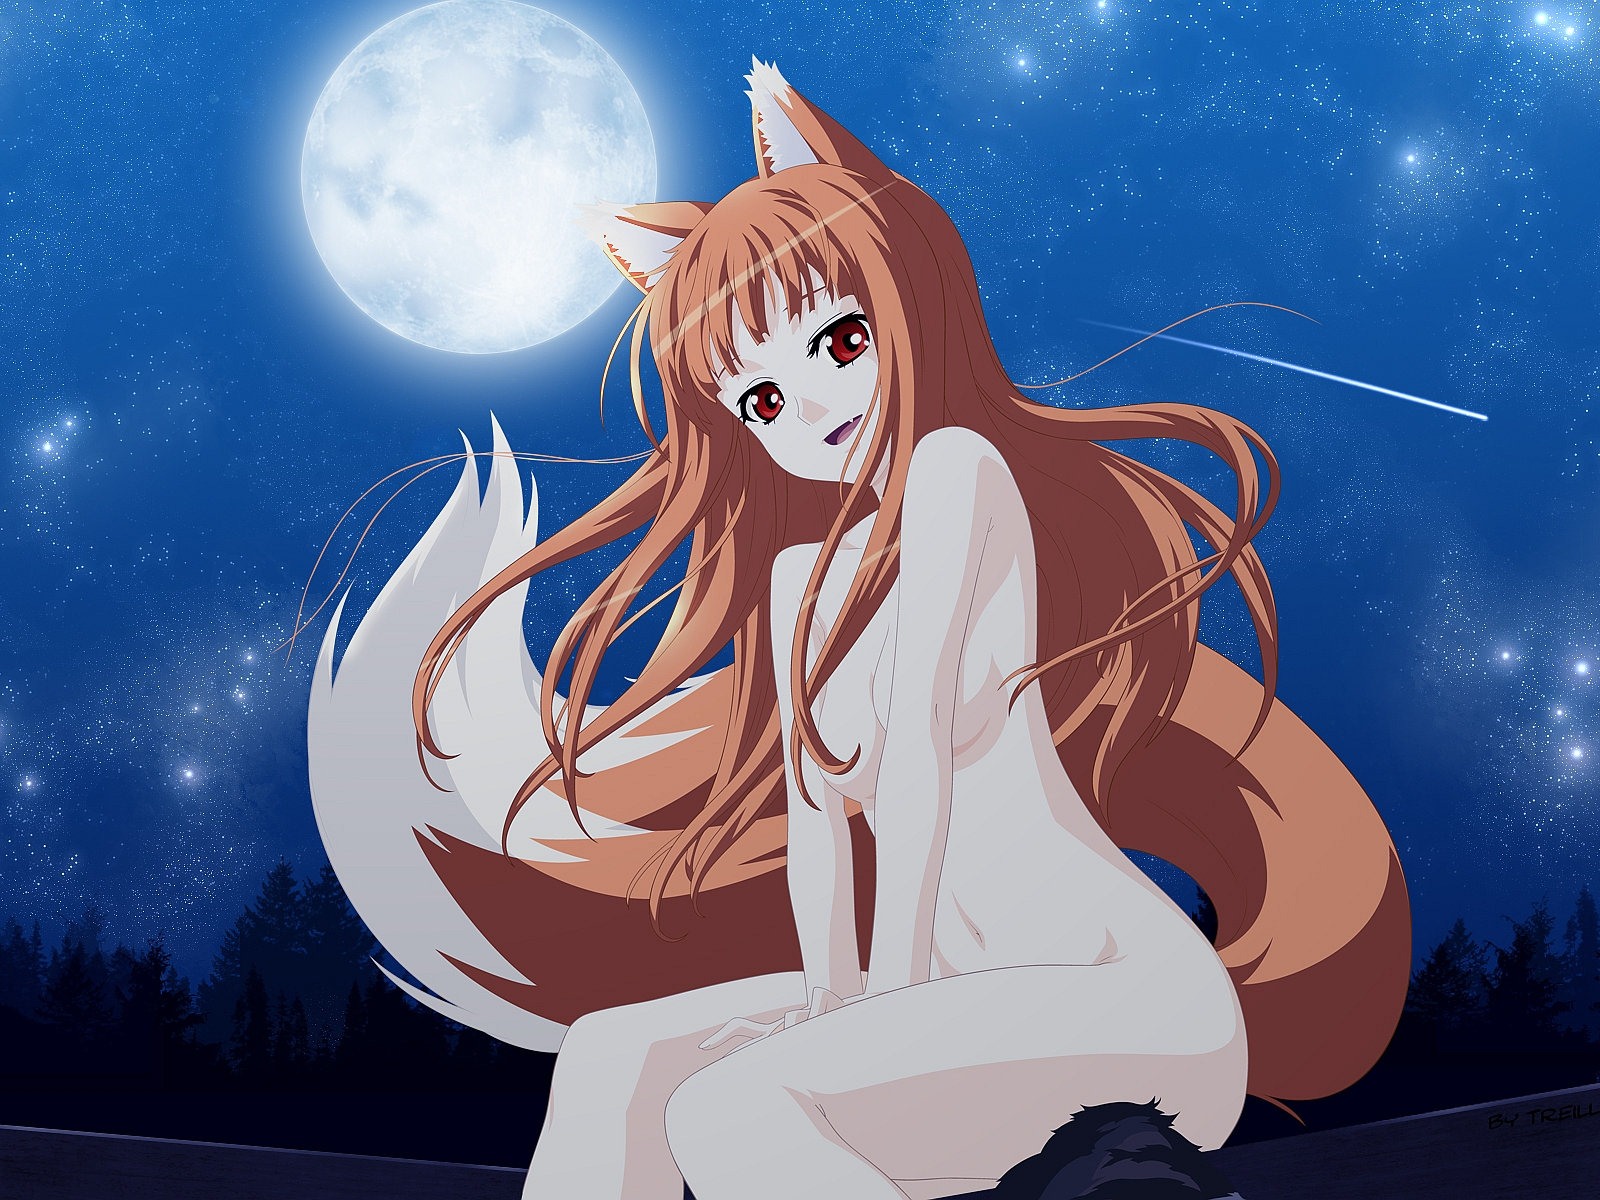 Spice and Wolf HD wallpapers #7 - 1600x1200